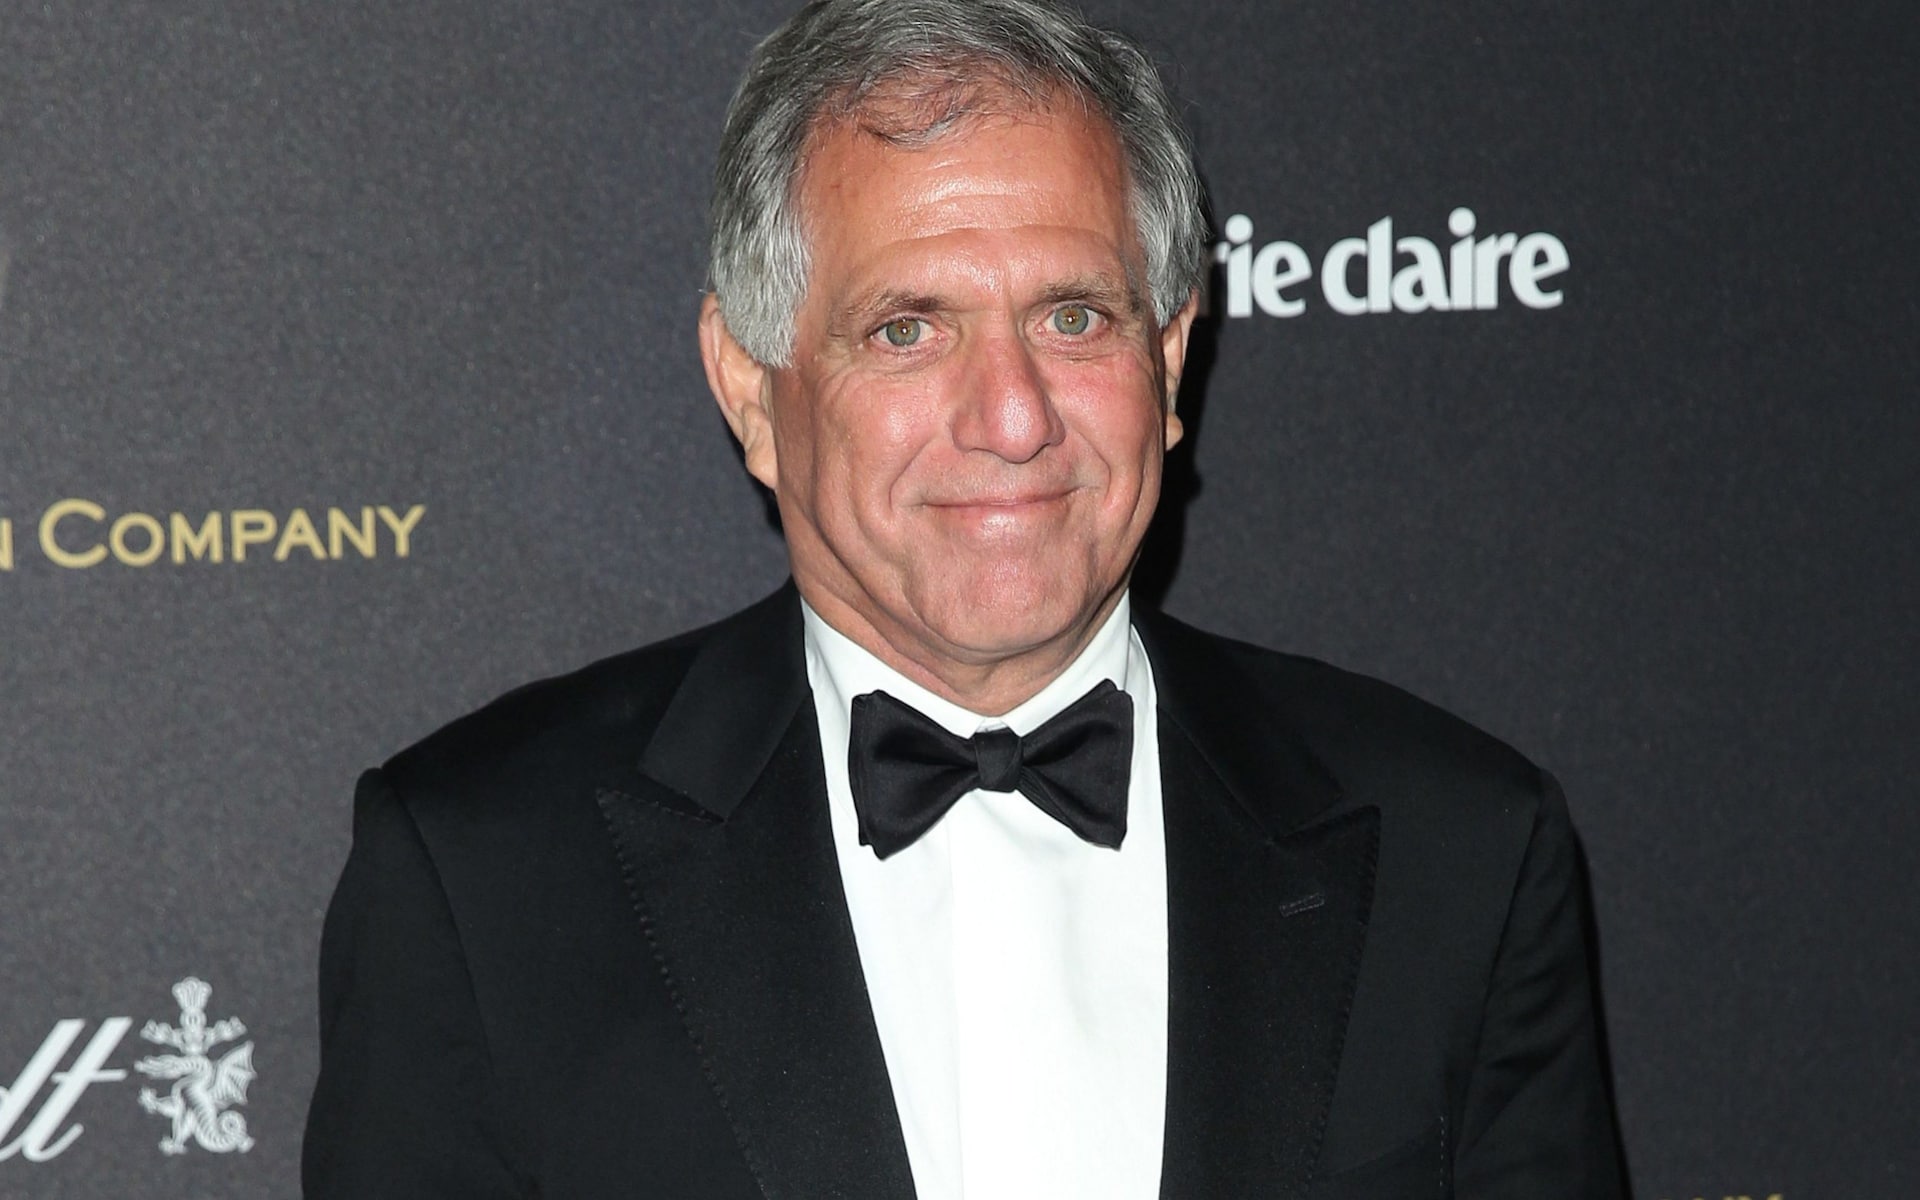 CEO of broadcast giant CBS Les Moonves investigated for sexual misconduct